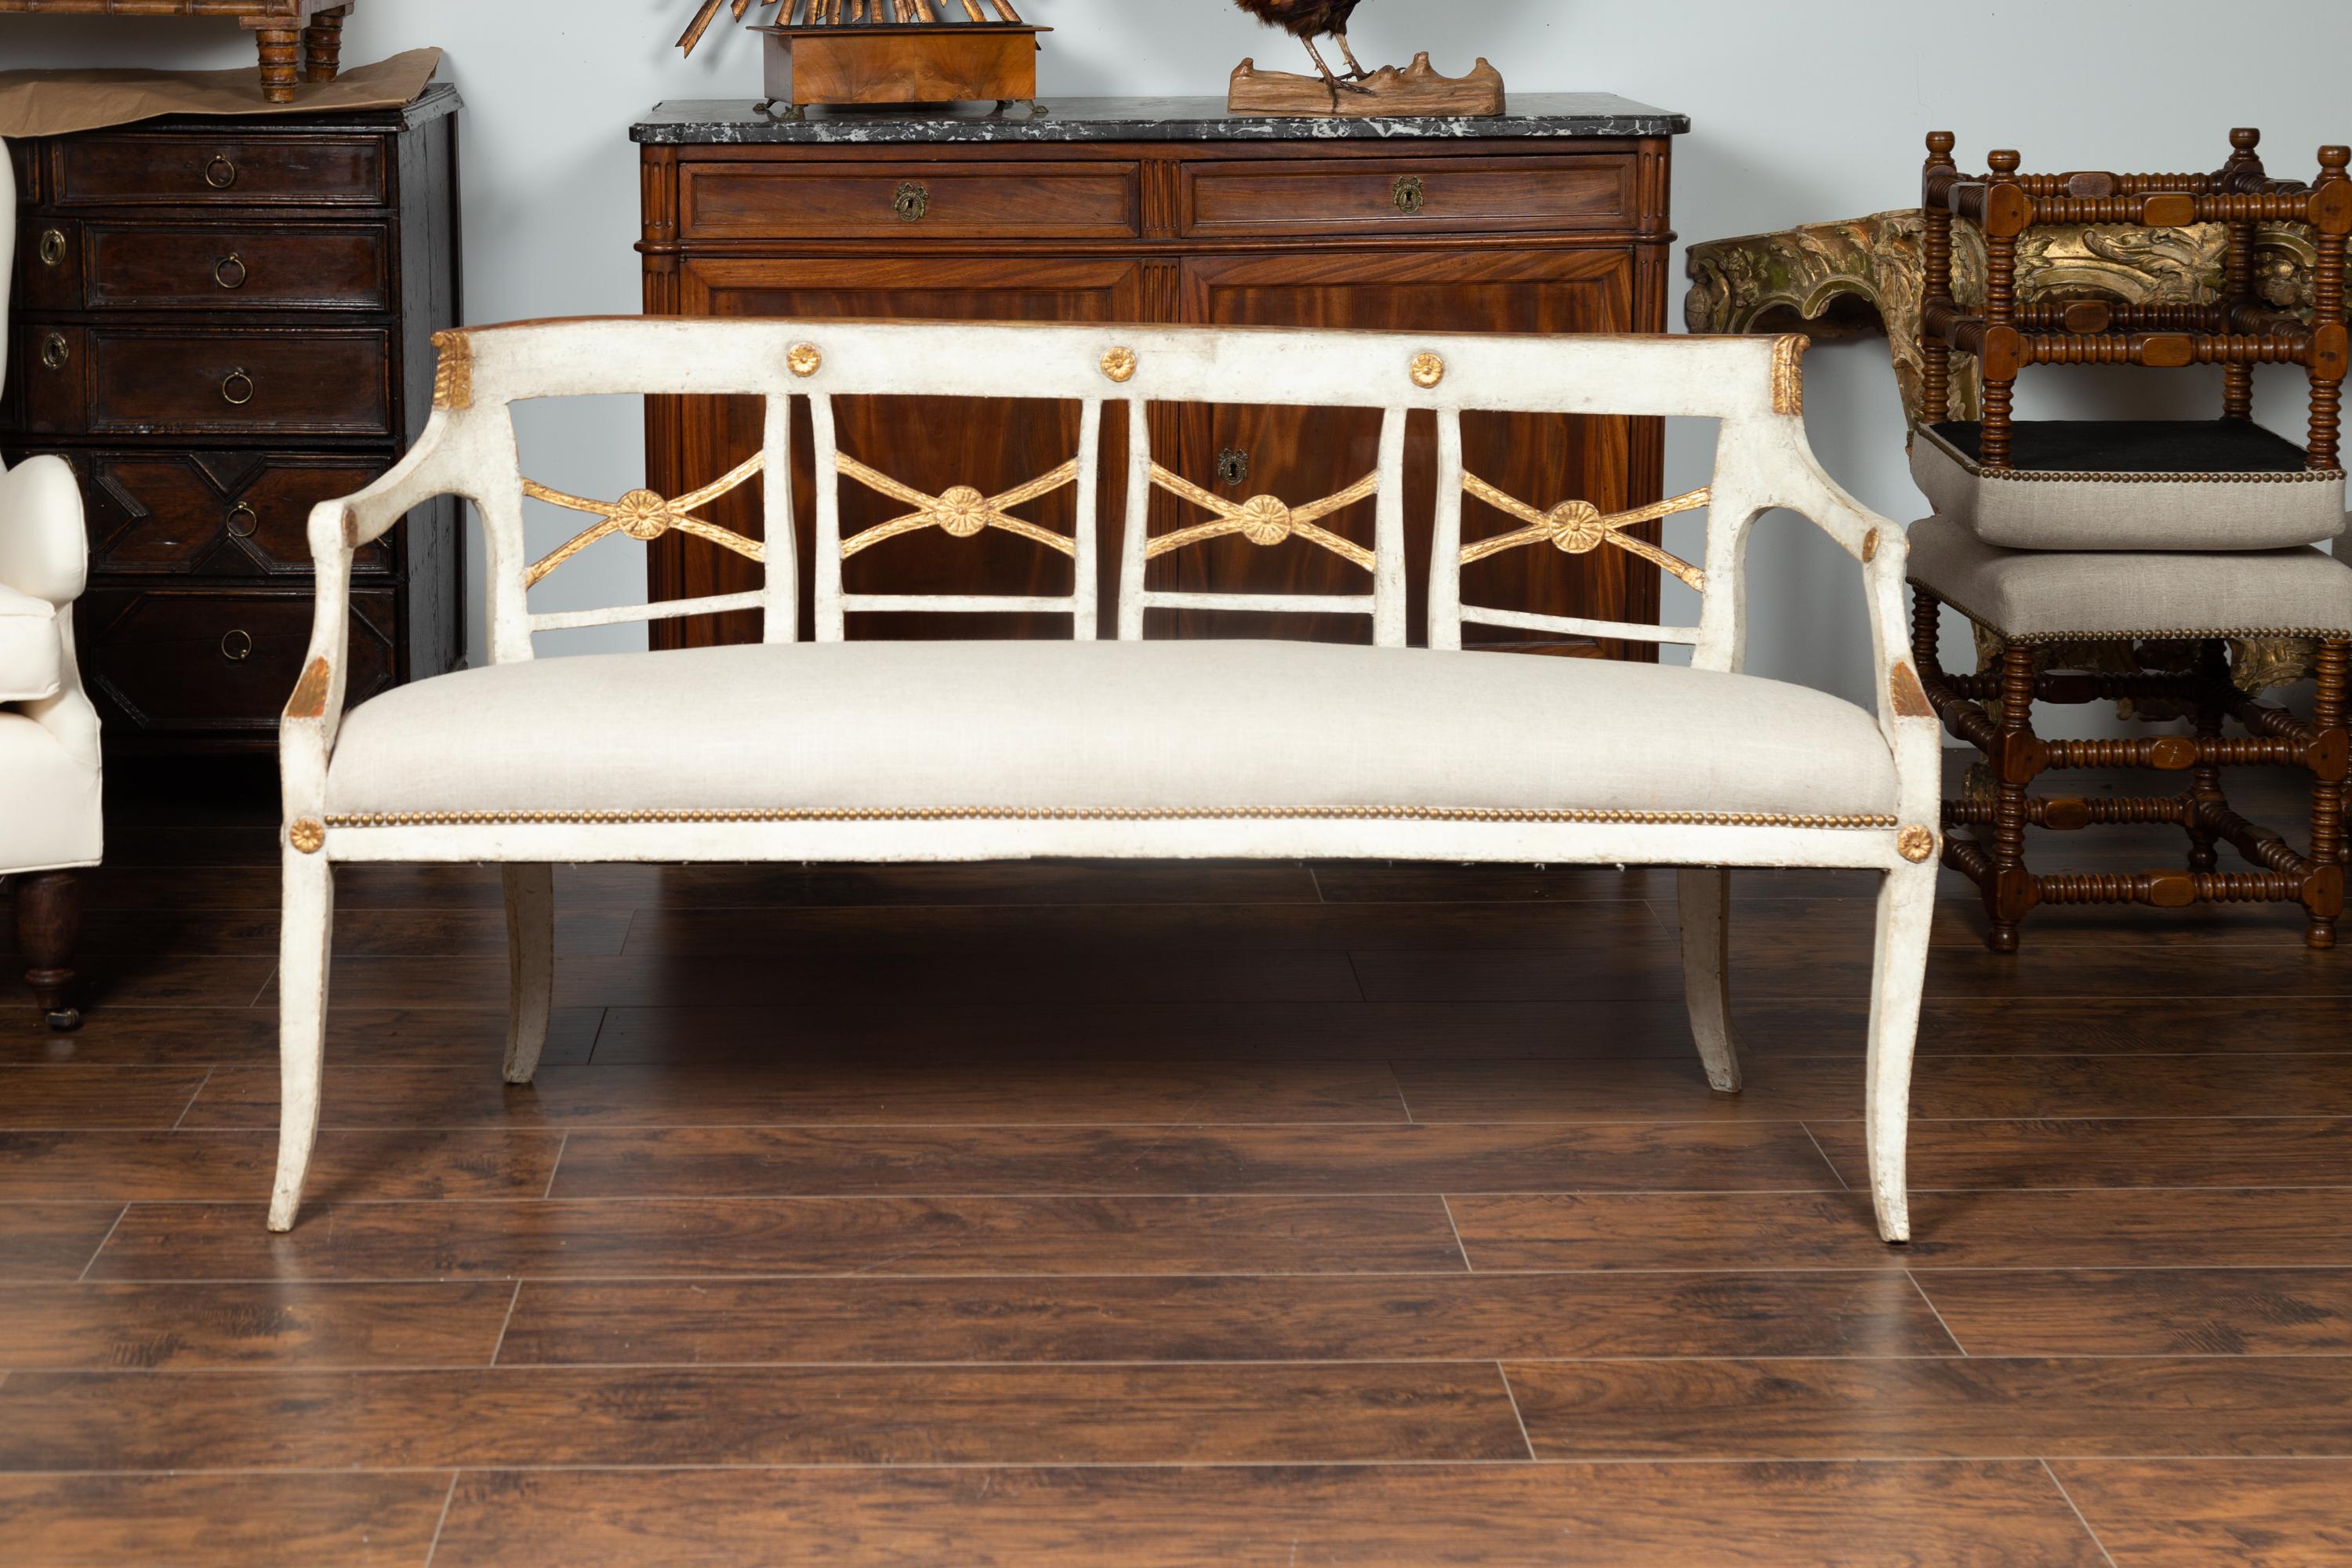 Italian 1860s Painted Wood Bench with Gilded Accents and New Upholstery For Sale 8